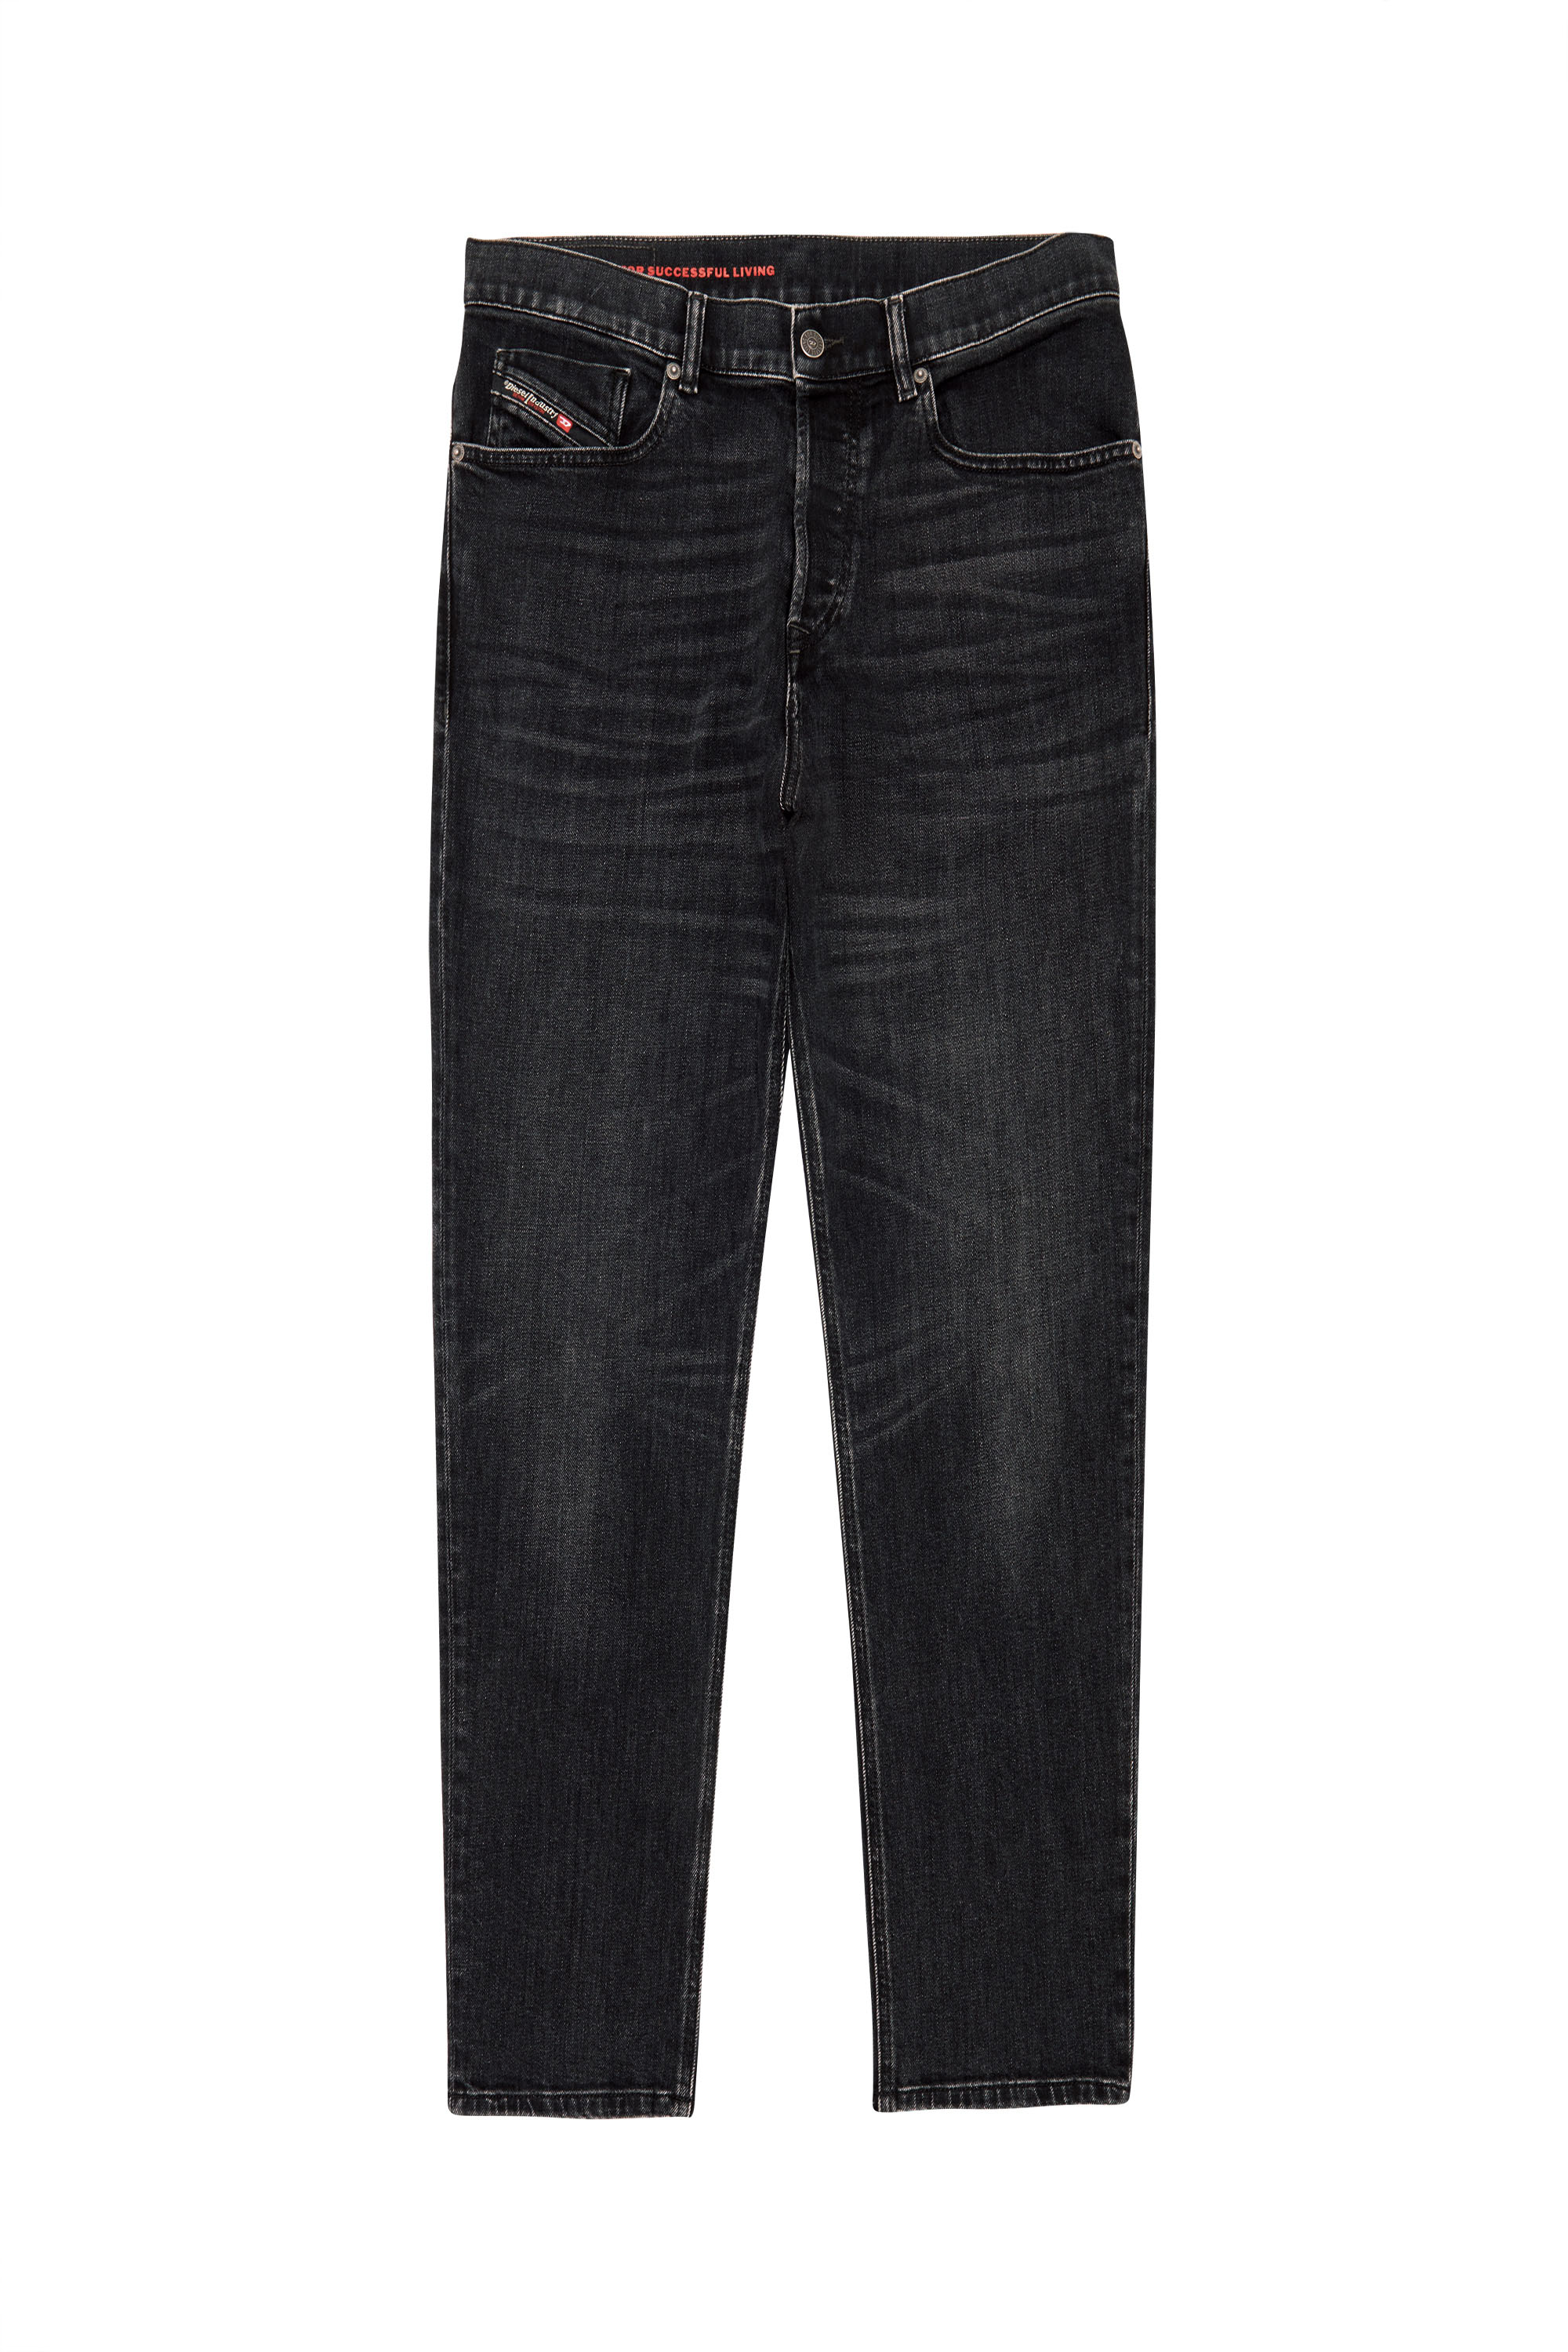 2005 D-FINING 09B83 Tapered Jeans, Nero/Grigio scuro - Jeans